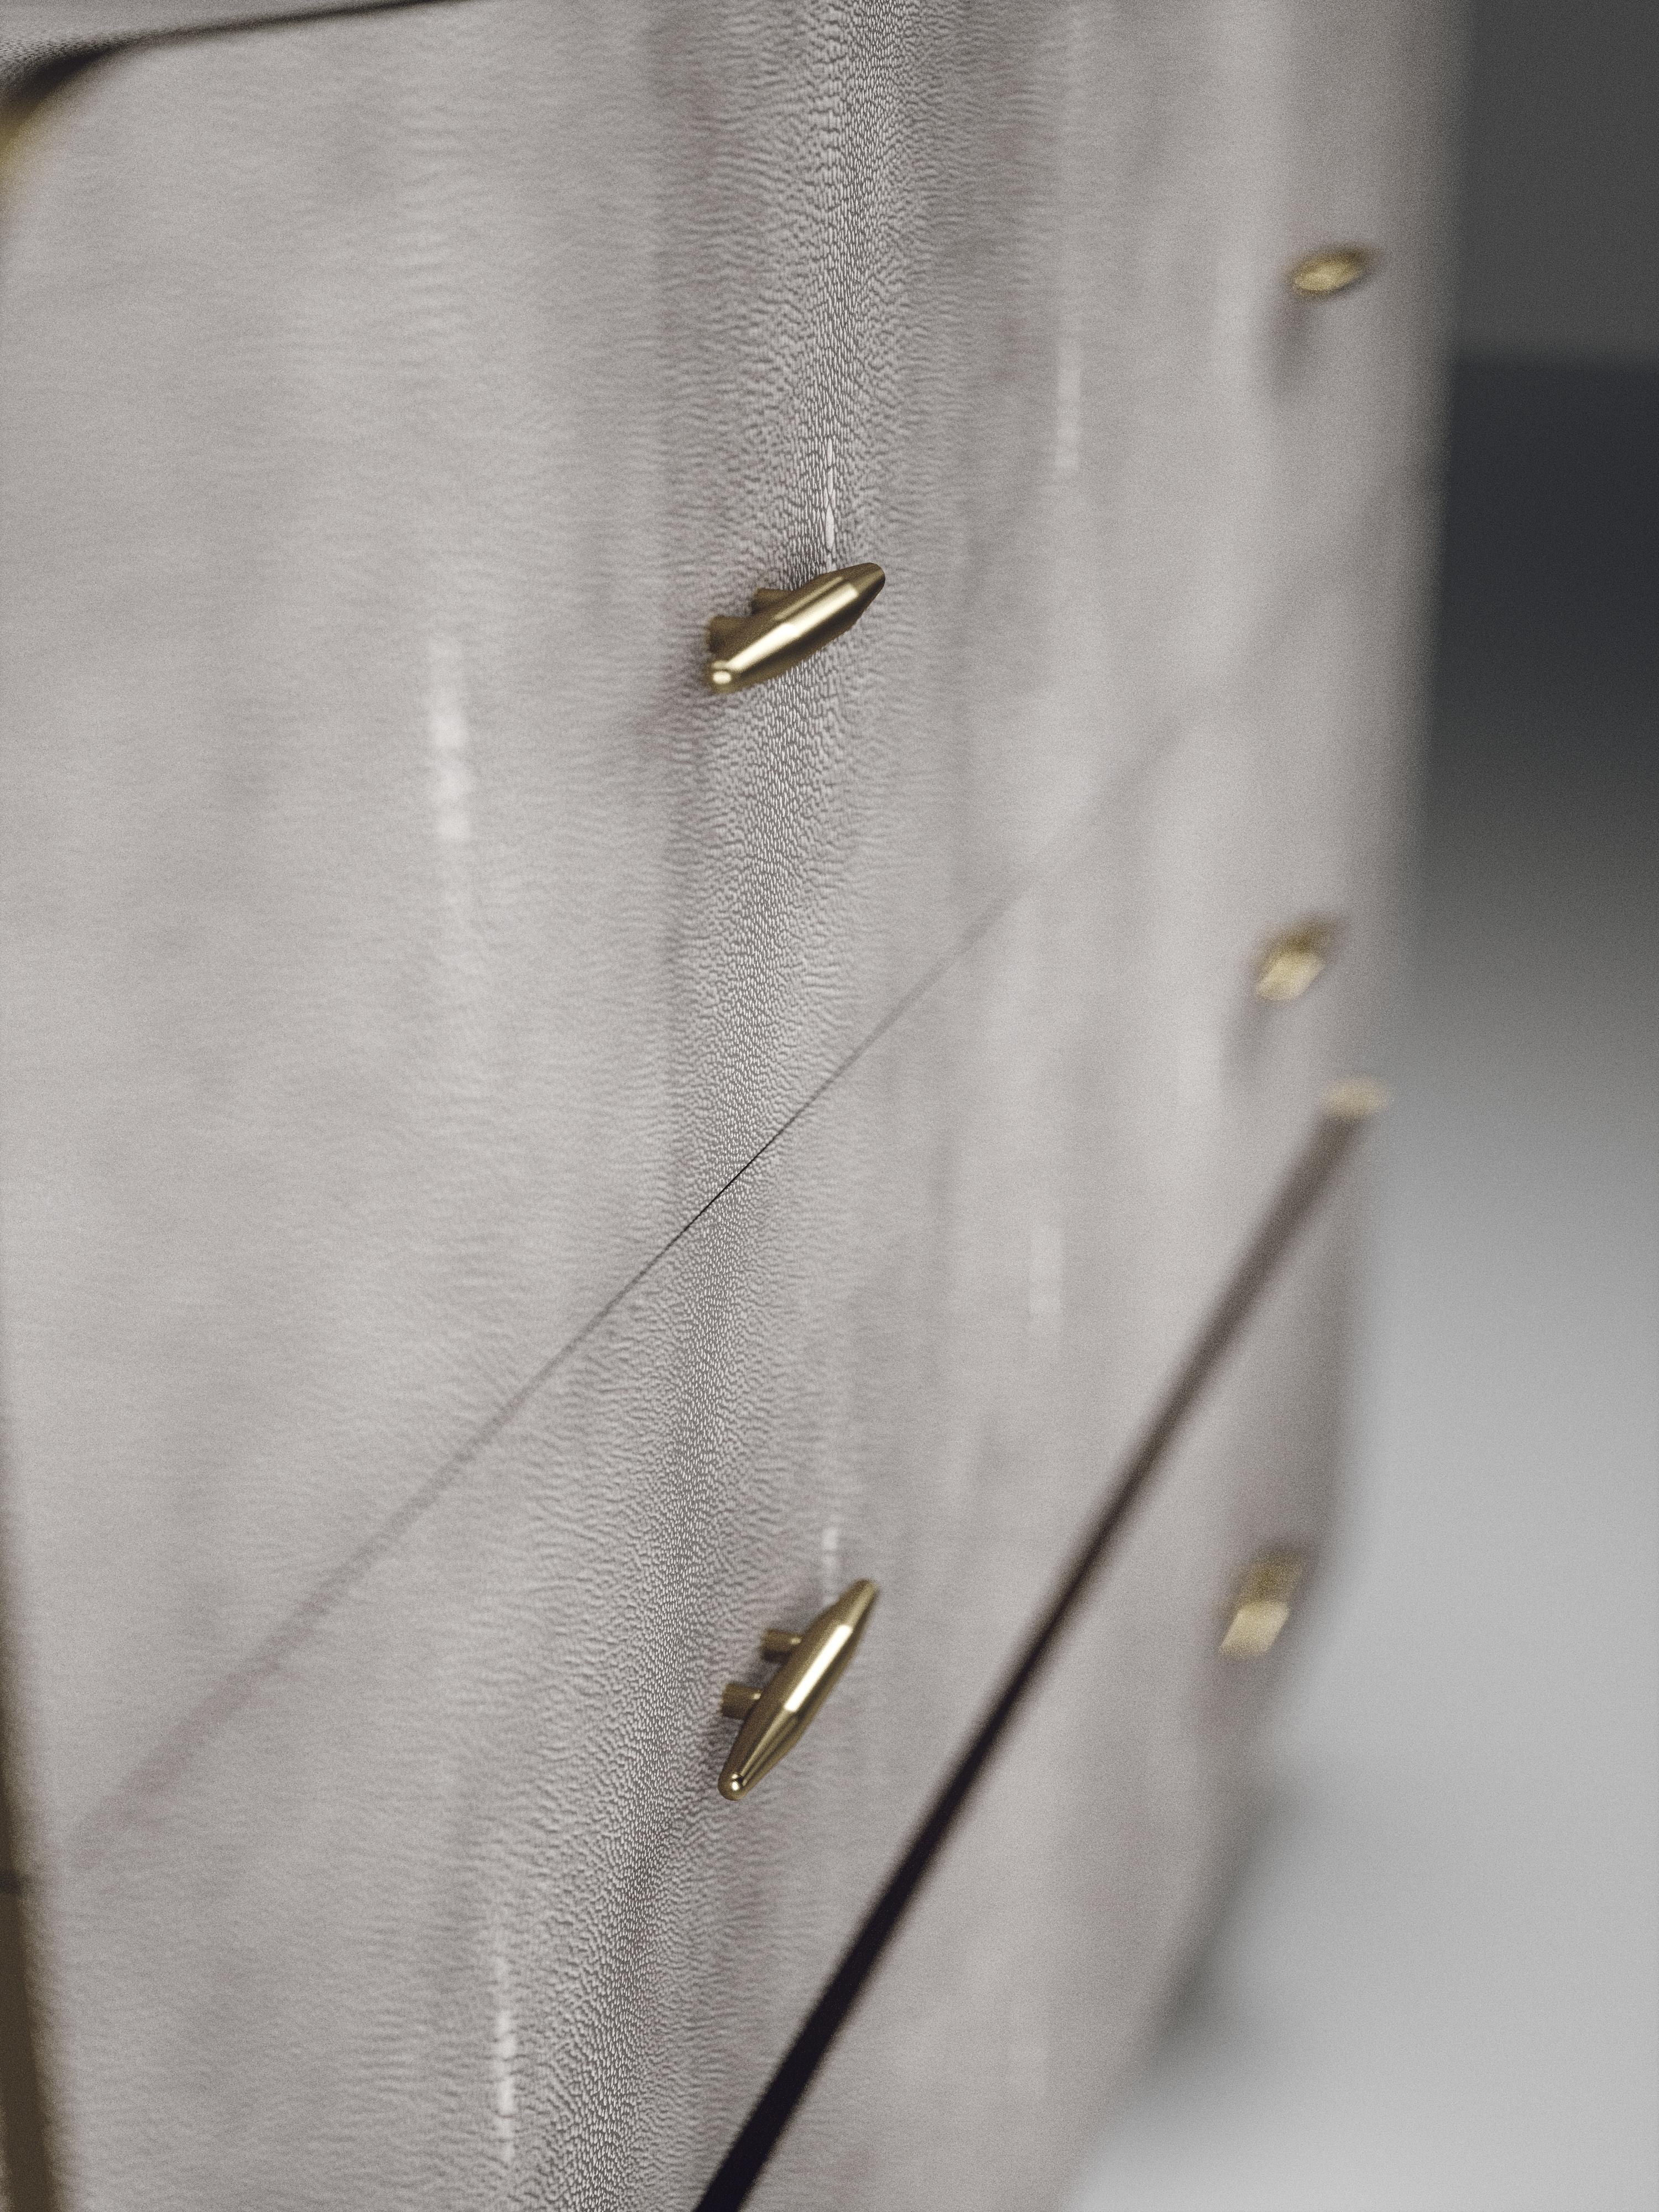 Shagreen Chest of Drawers with Brass Accents by Kifu Paris For Sale 8